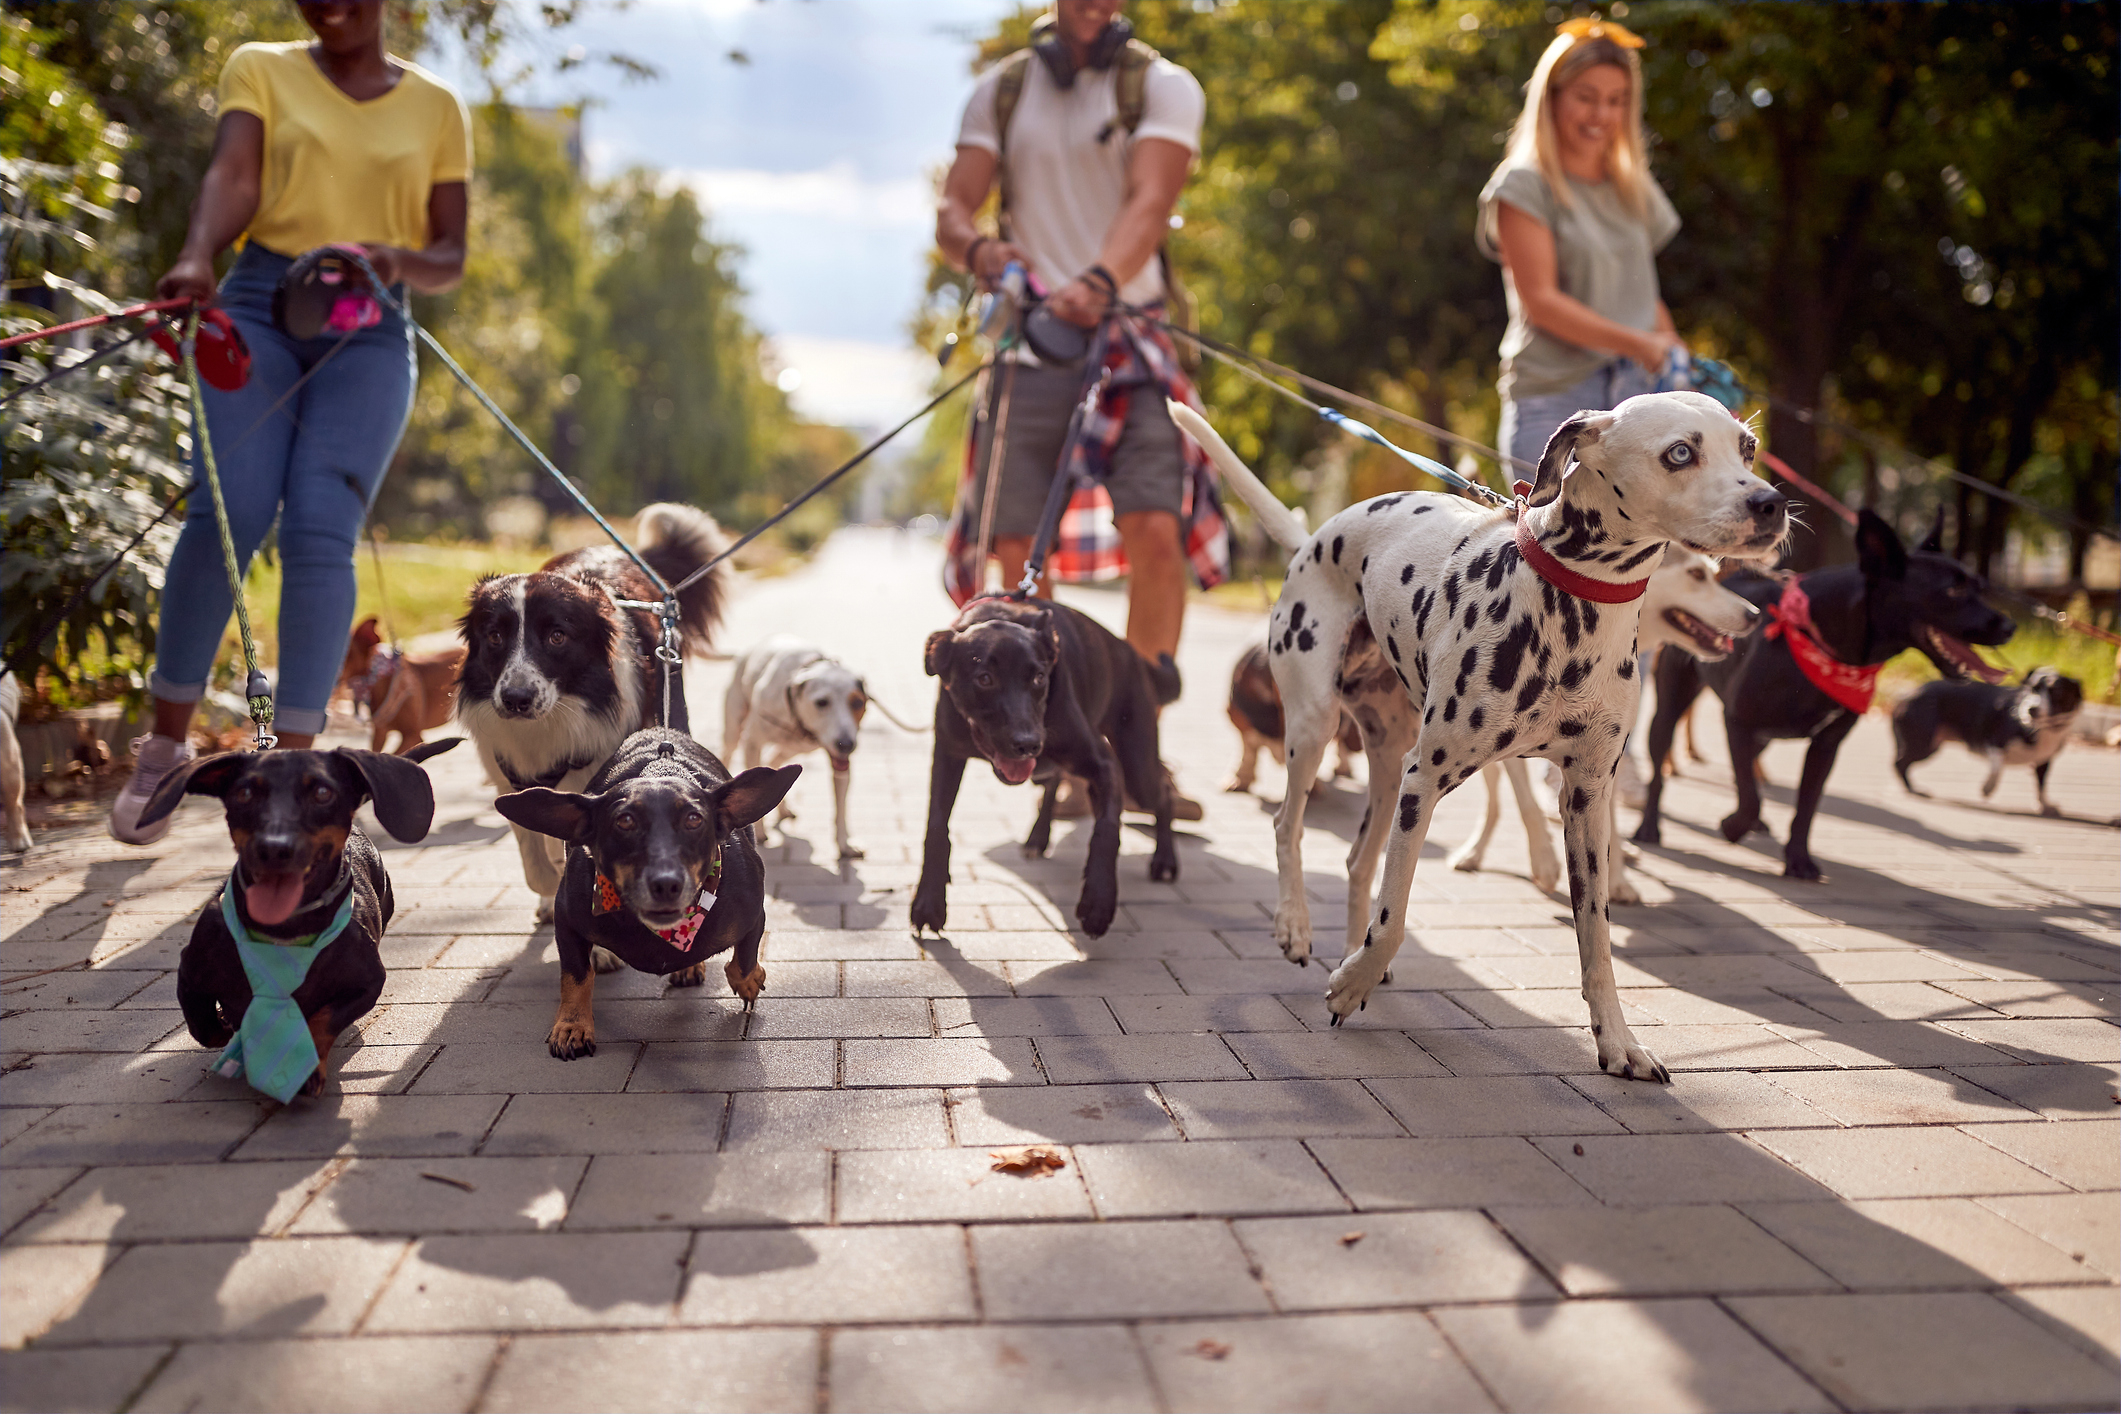 Group of dogs being walked by people on a sunny day, suggesting pet-related jobs or services